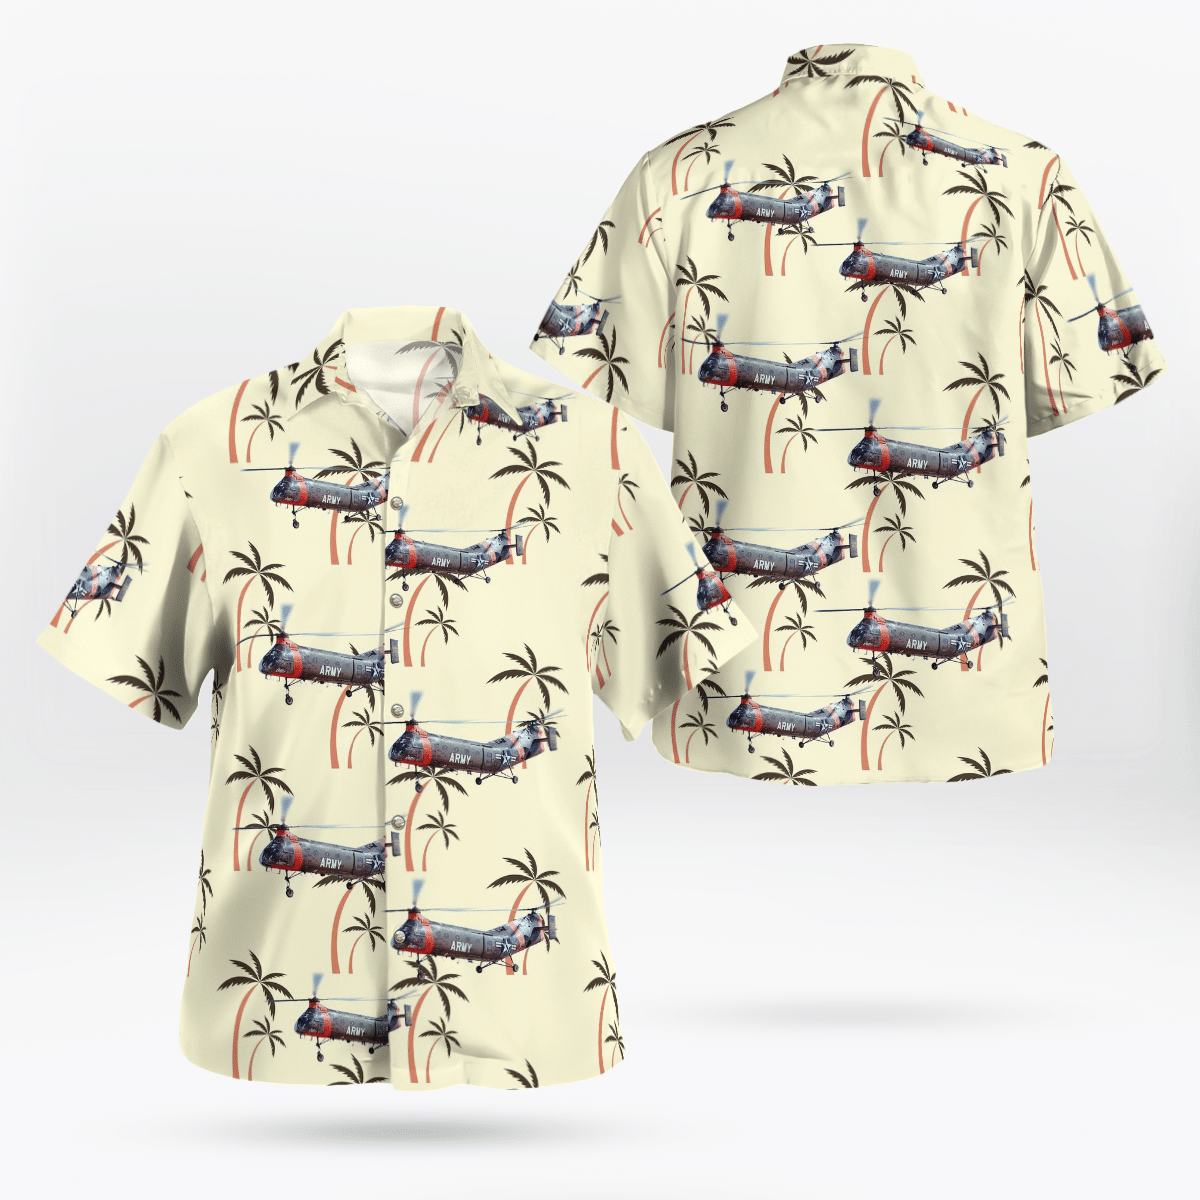 Shop now to find the perfect Hawaii Shirt for your hobby 155